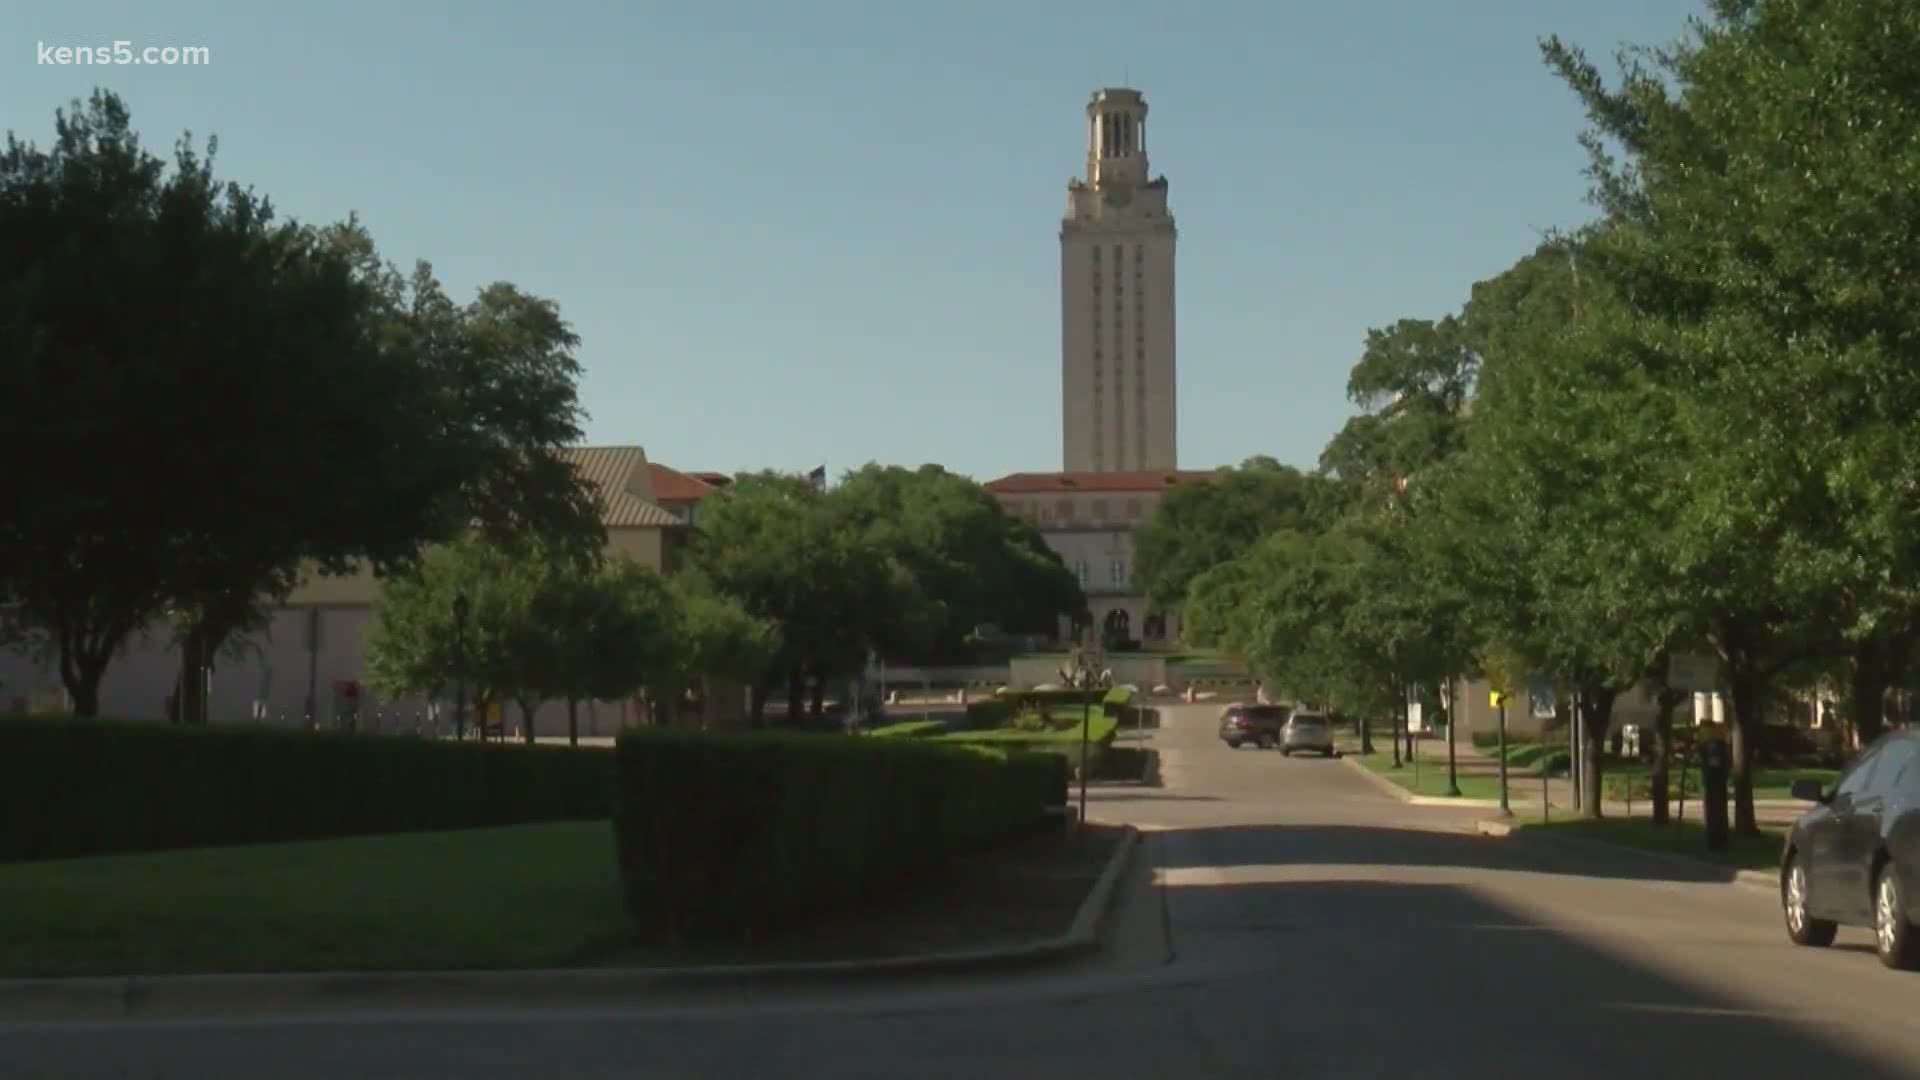 UT Austin issued a long list of guidelines for its football fans. Here's what to expect.